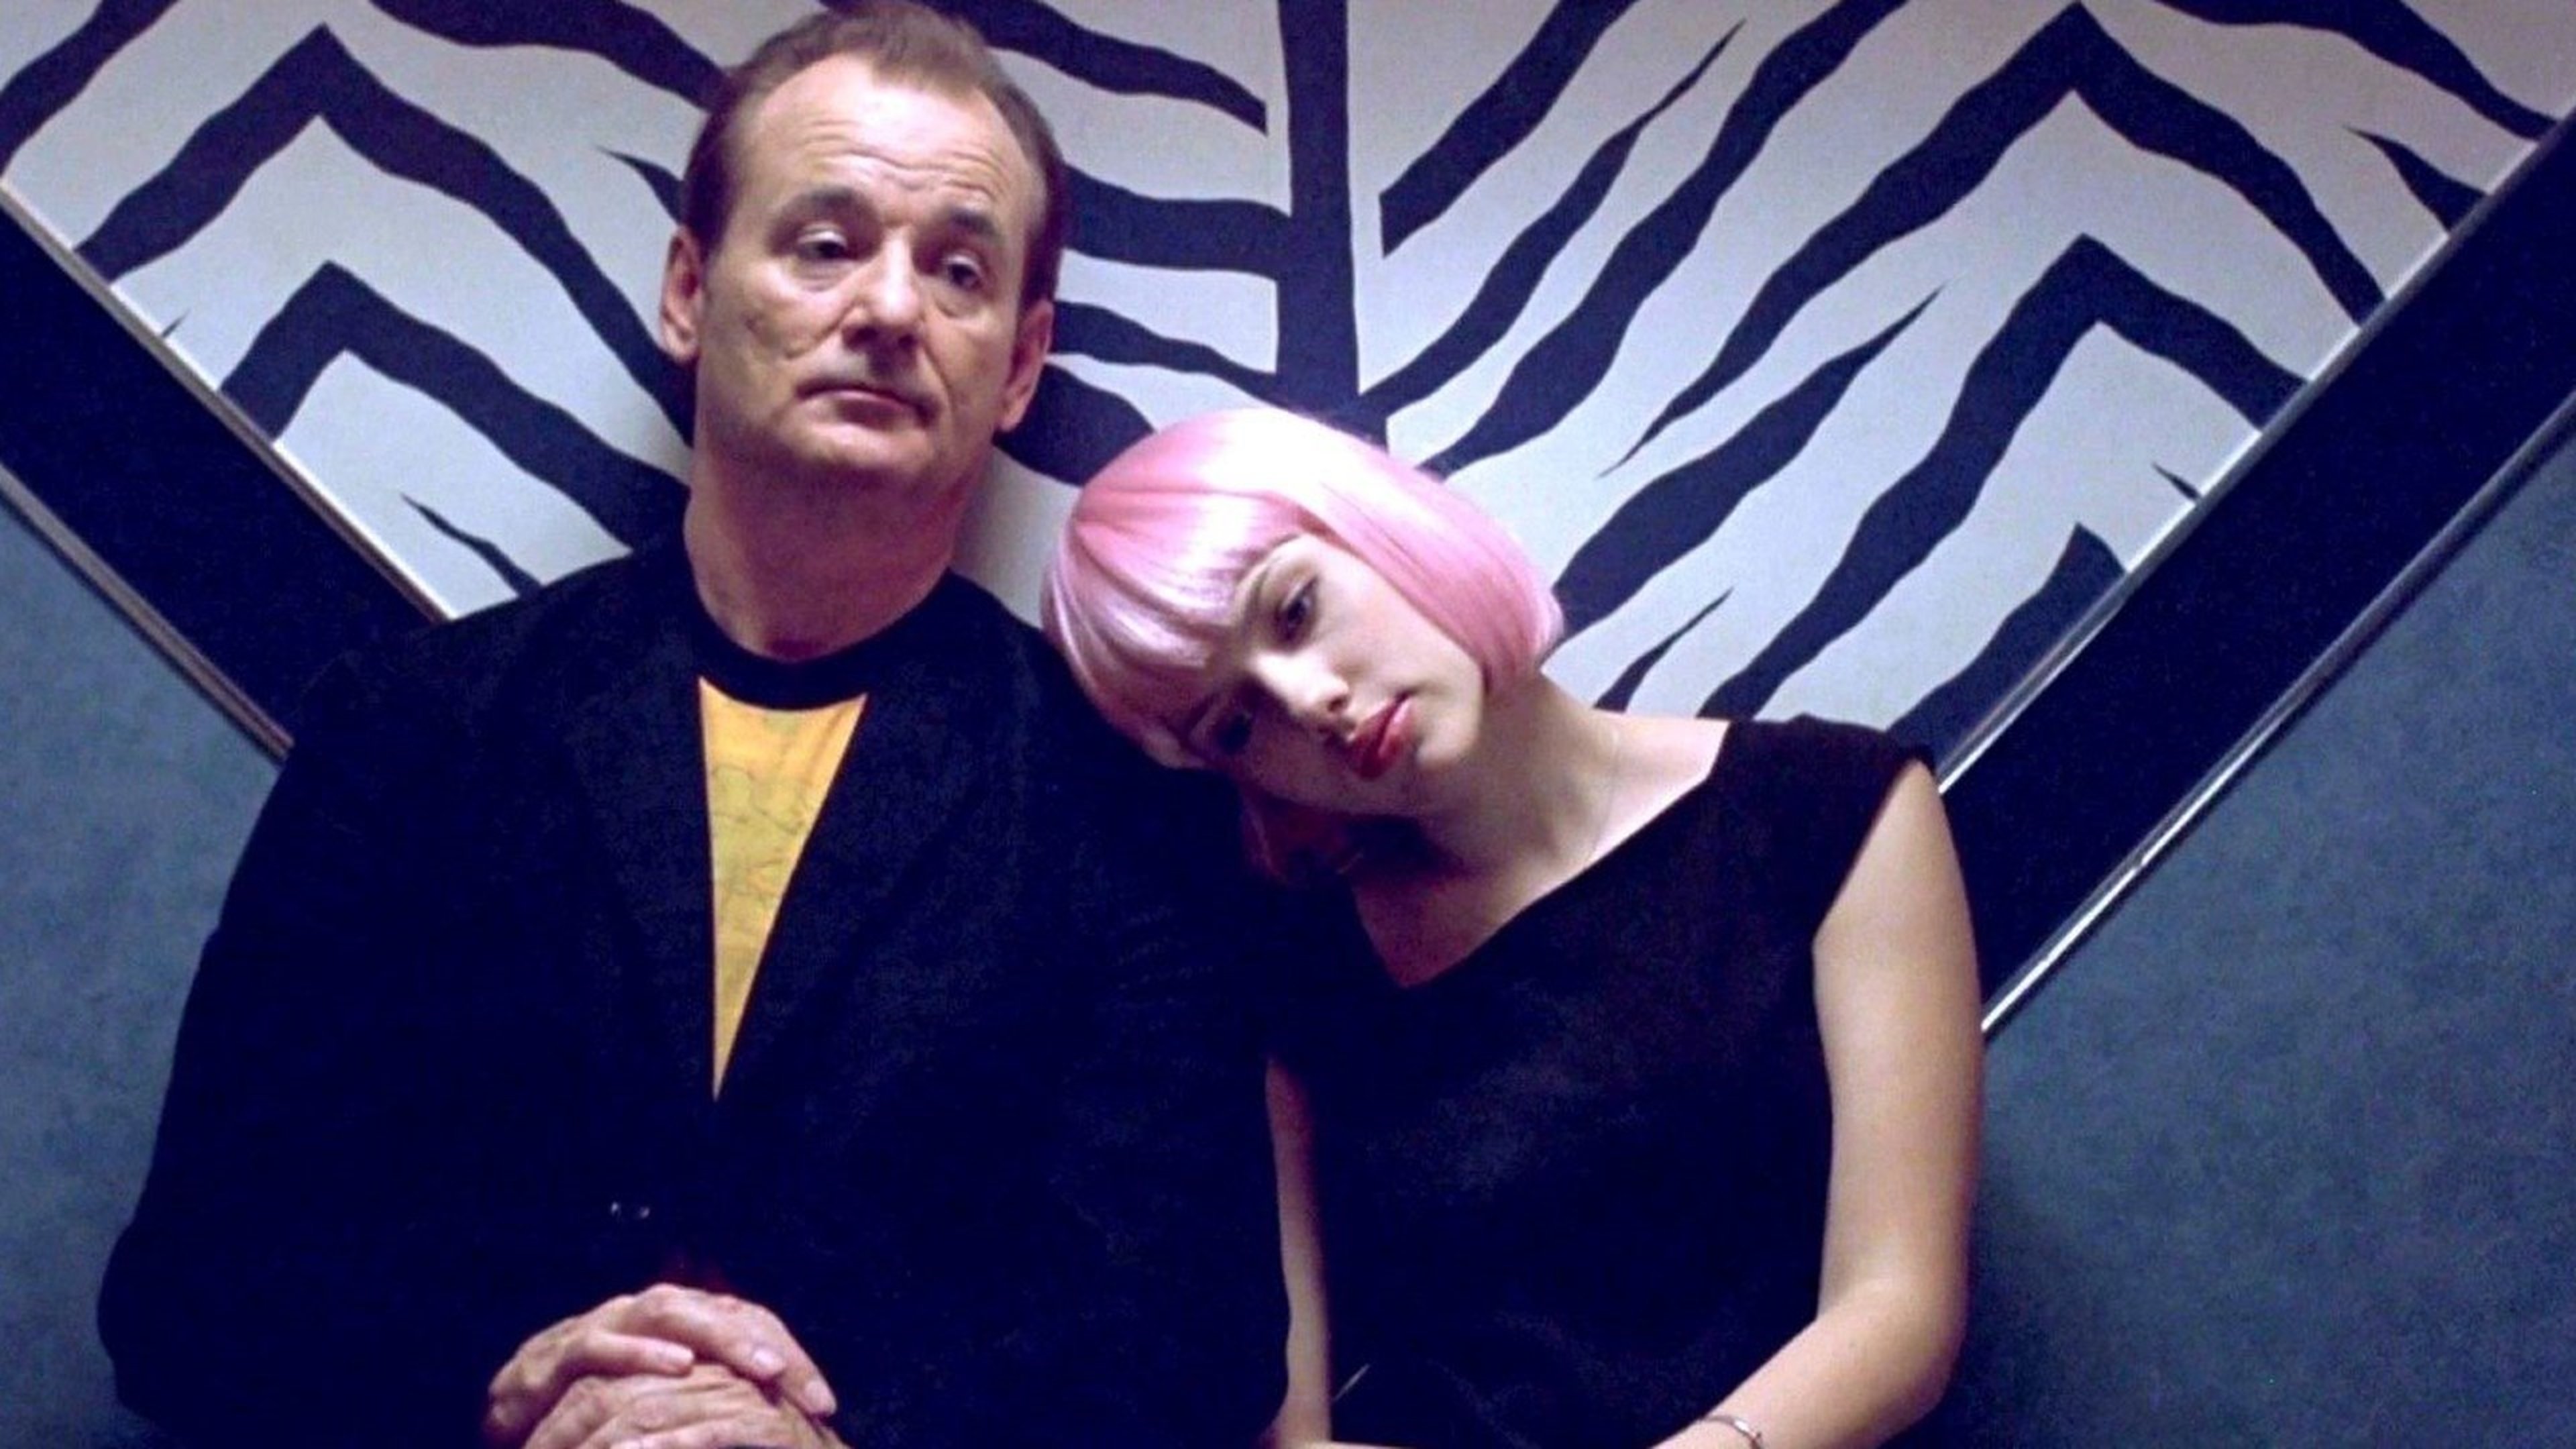 film come past lives: lost in translation